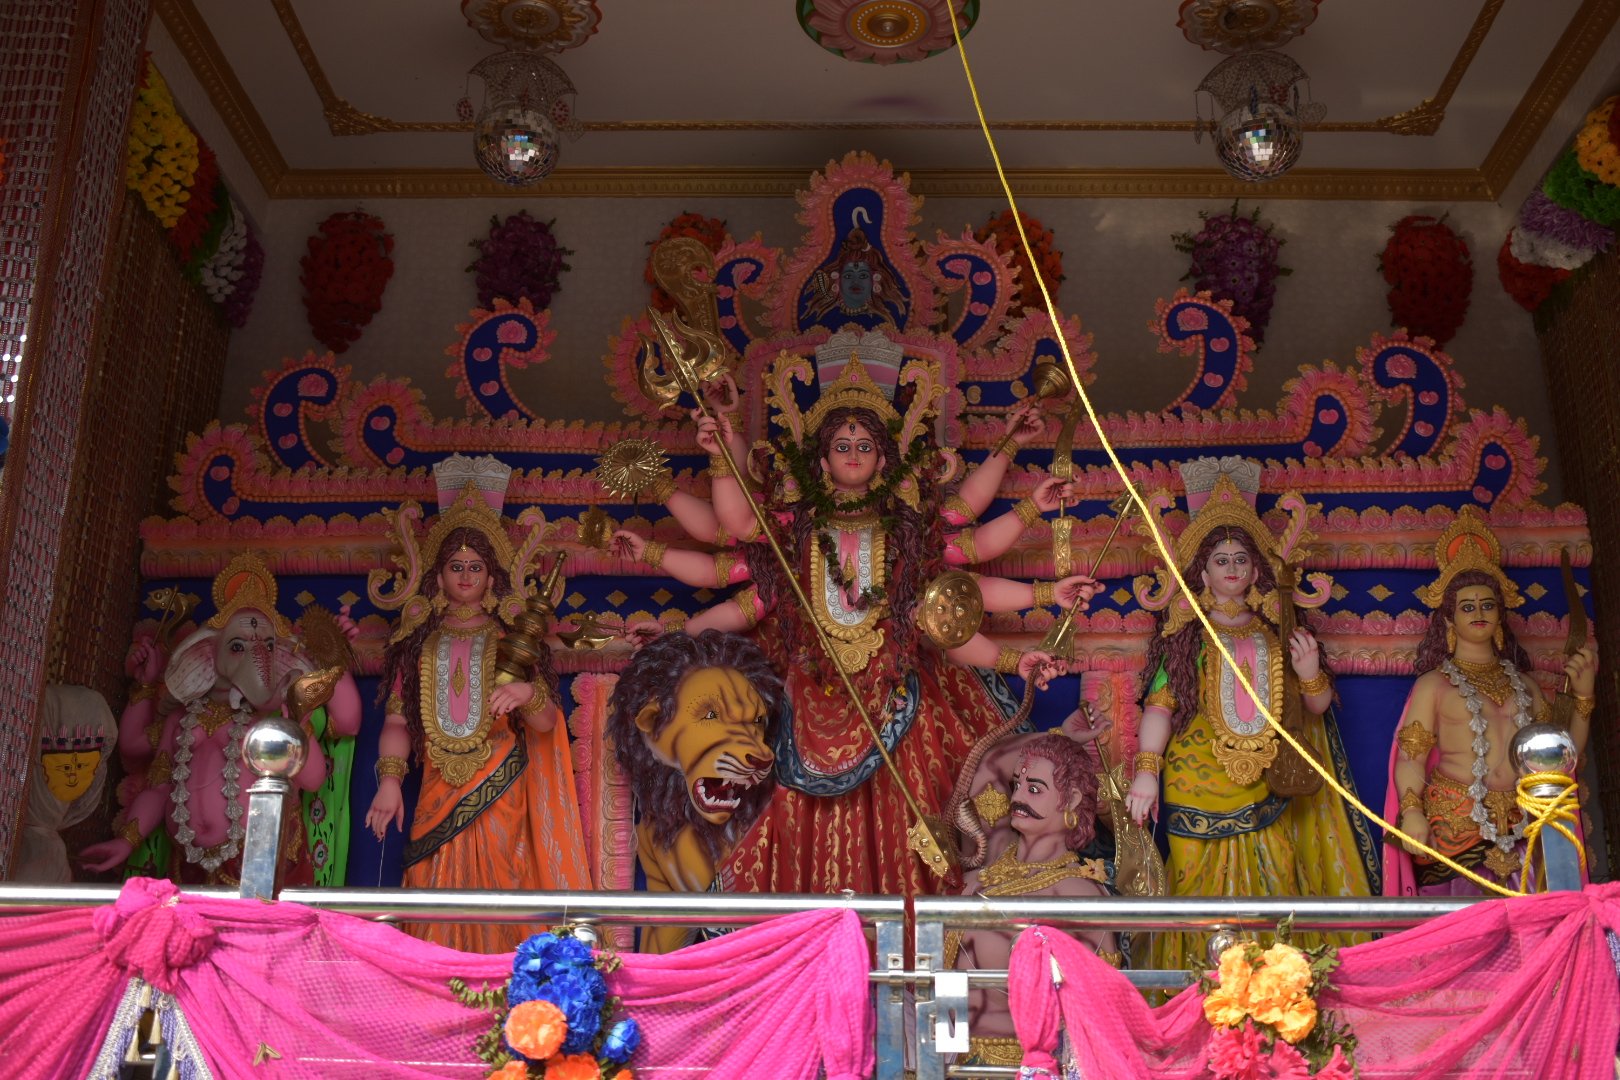 You are currently viewing Seth Colony Durga Puja Pandel & Theme, Kaliyaganj